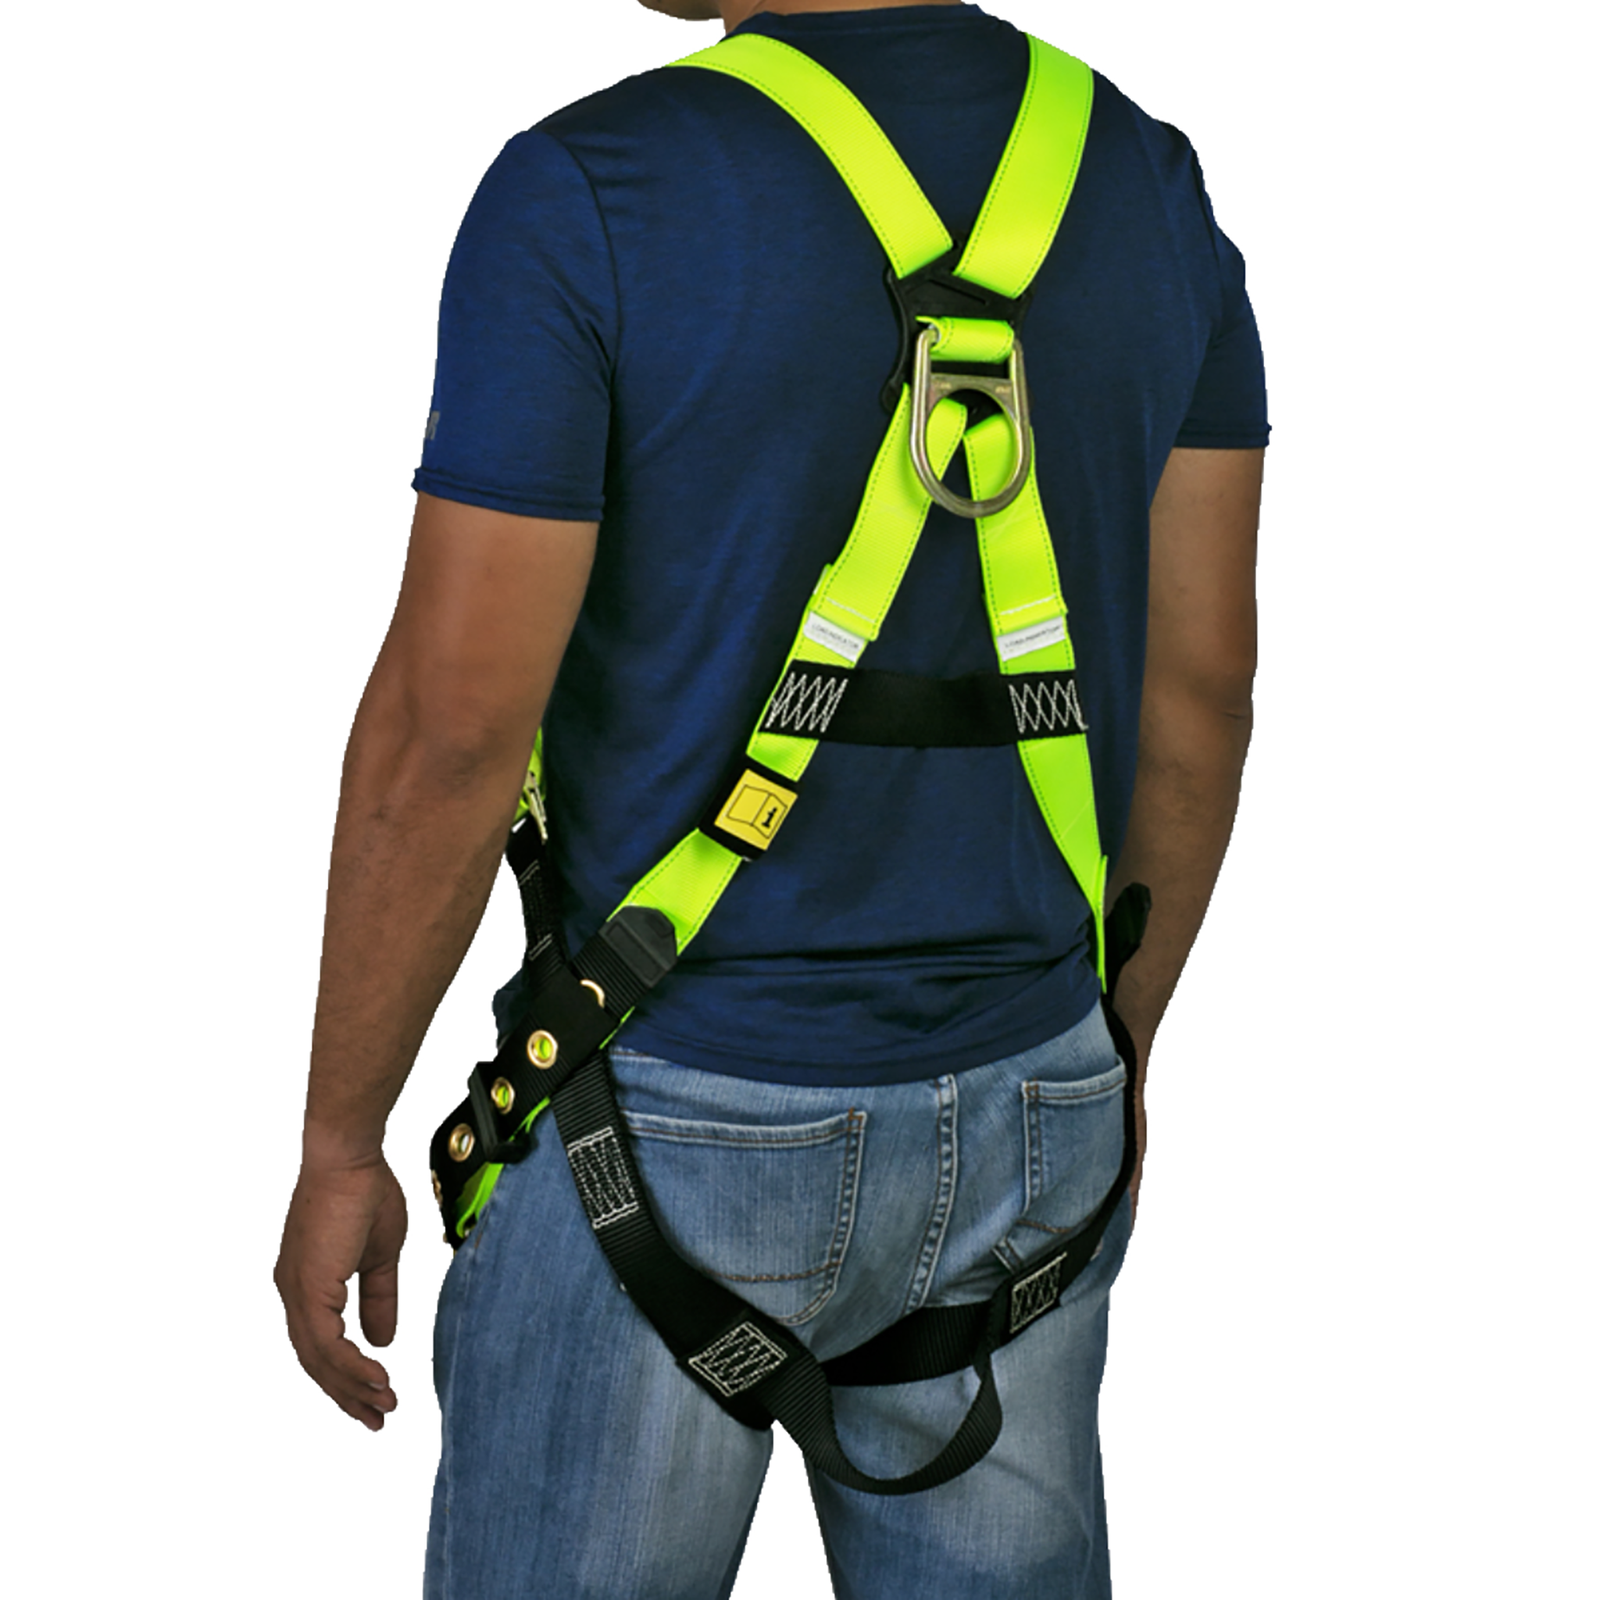 Back view of the torso of a person wearing the hi-vis yellow and black 1D fall protection safety body JORESTECH harness